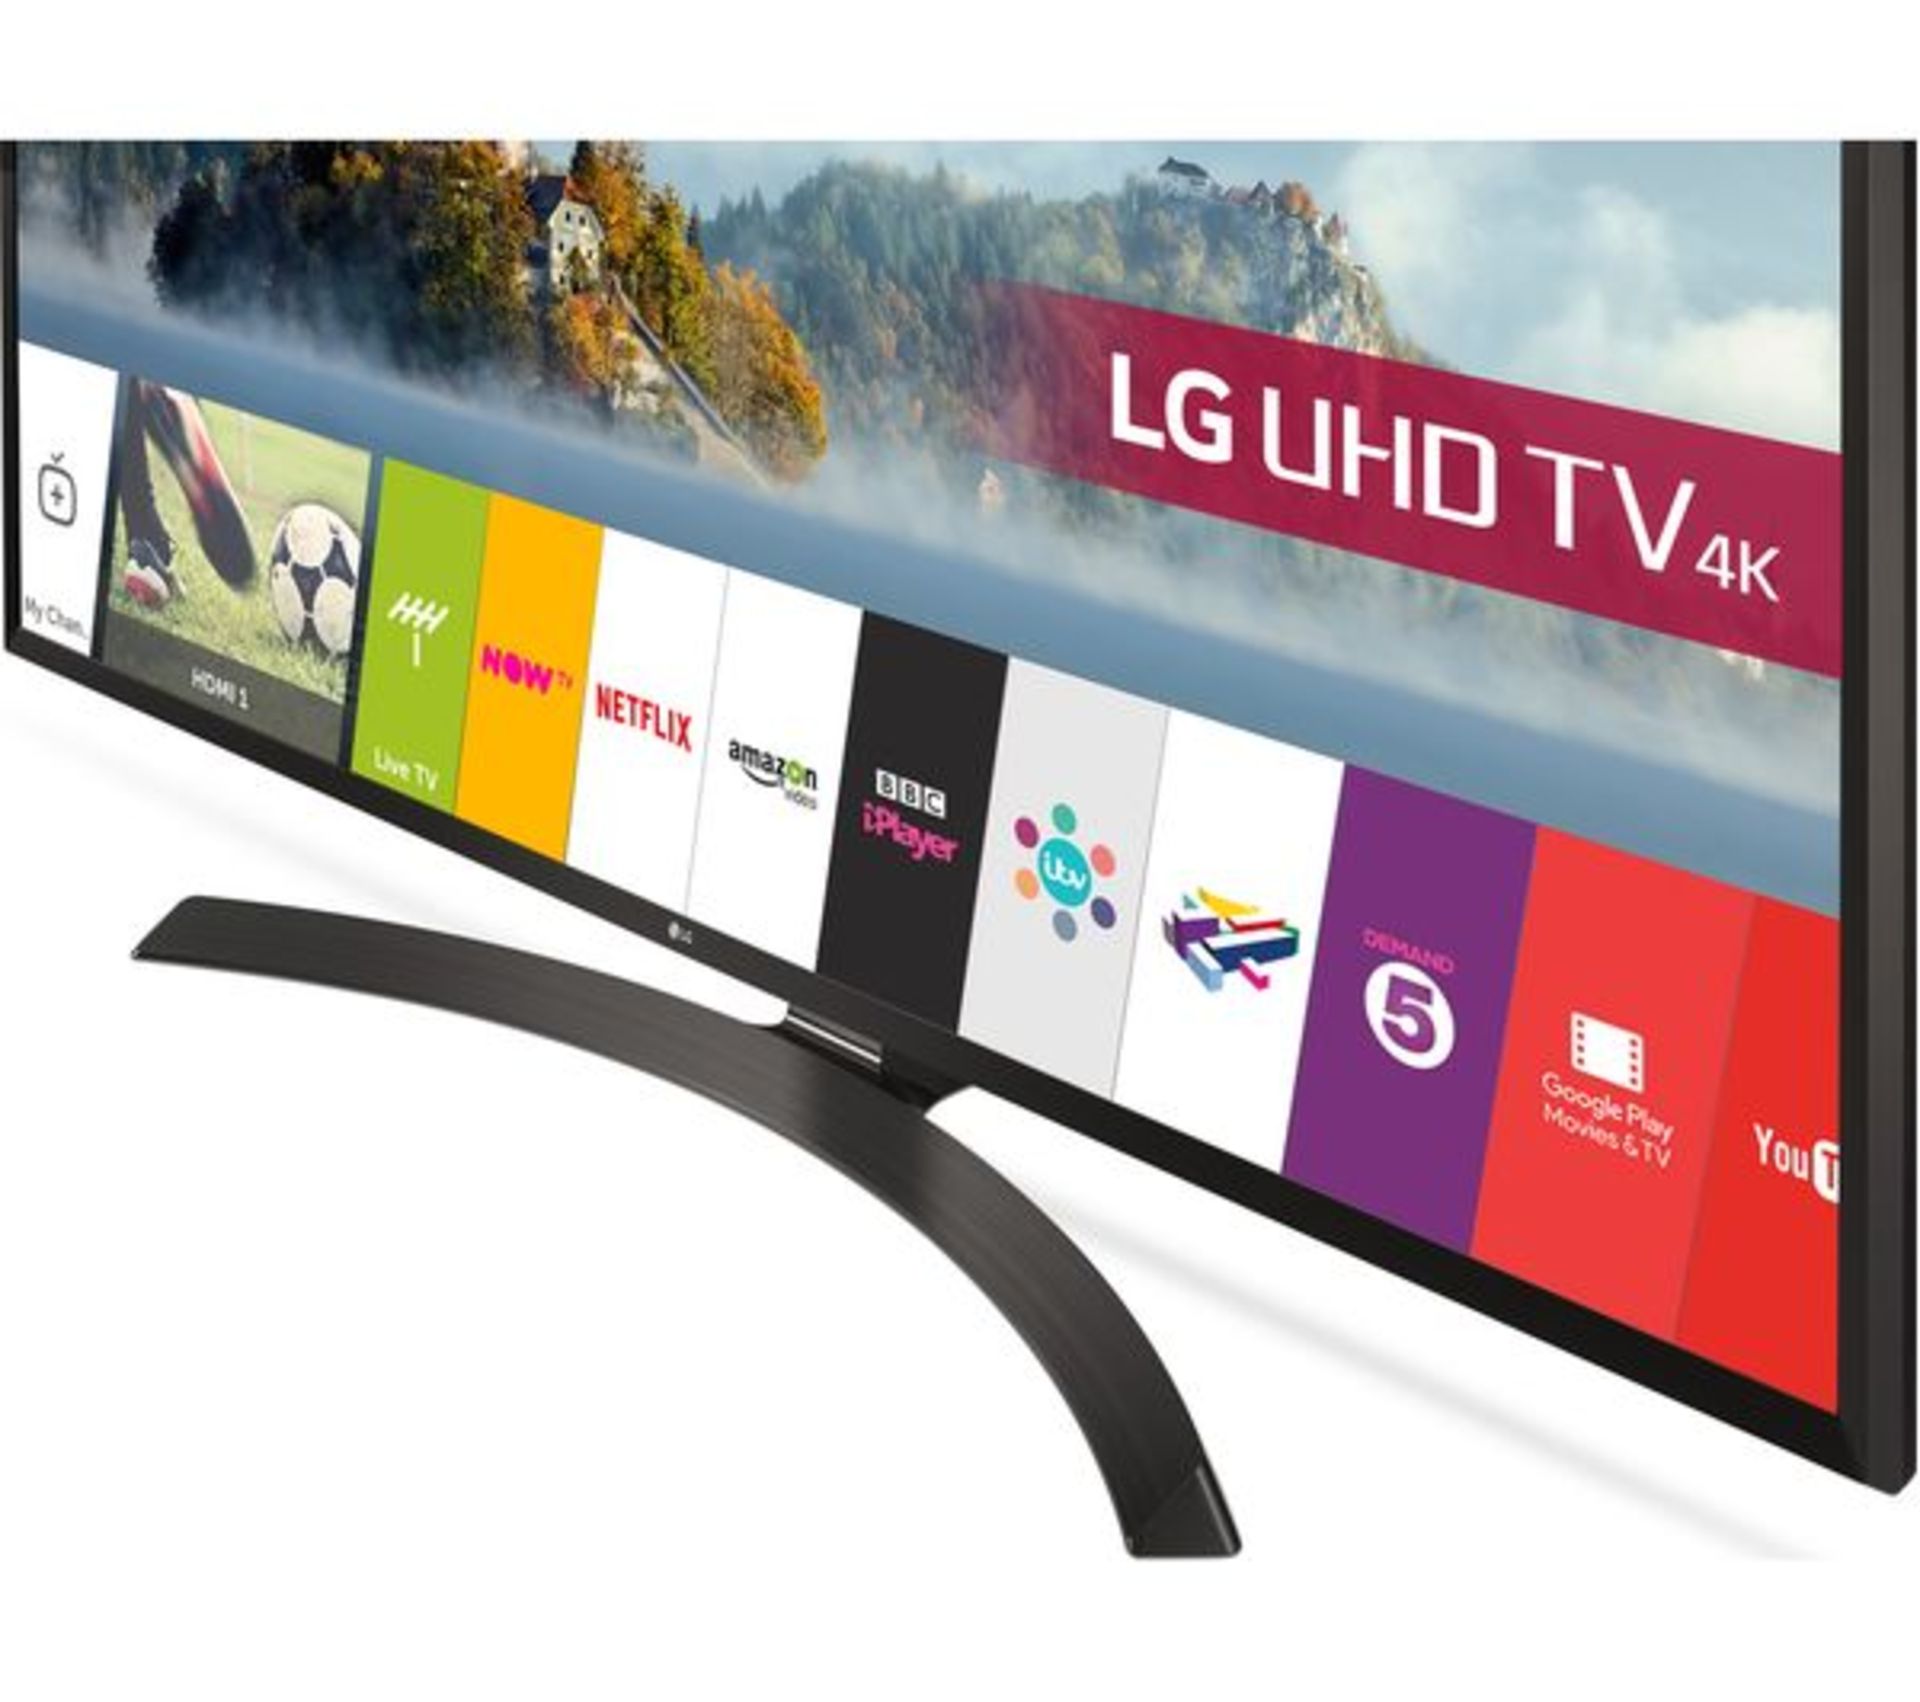 V Grade A LG 43" 4K Ultra HD Smart TV With HDR - Built In WiFi - Bluetooth - WebOS Operating - Image 2 of 4